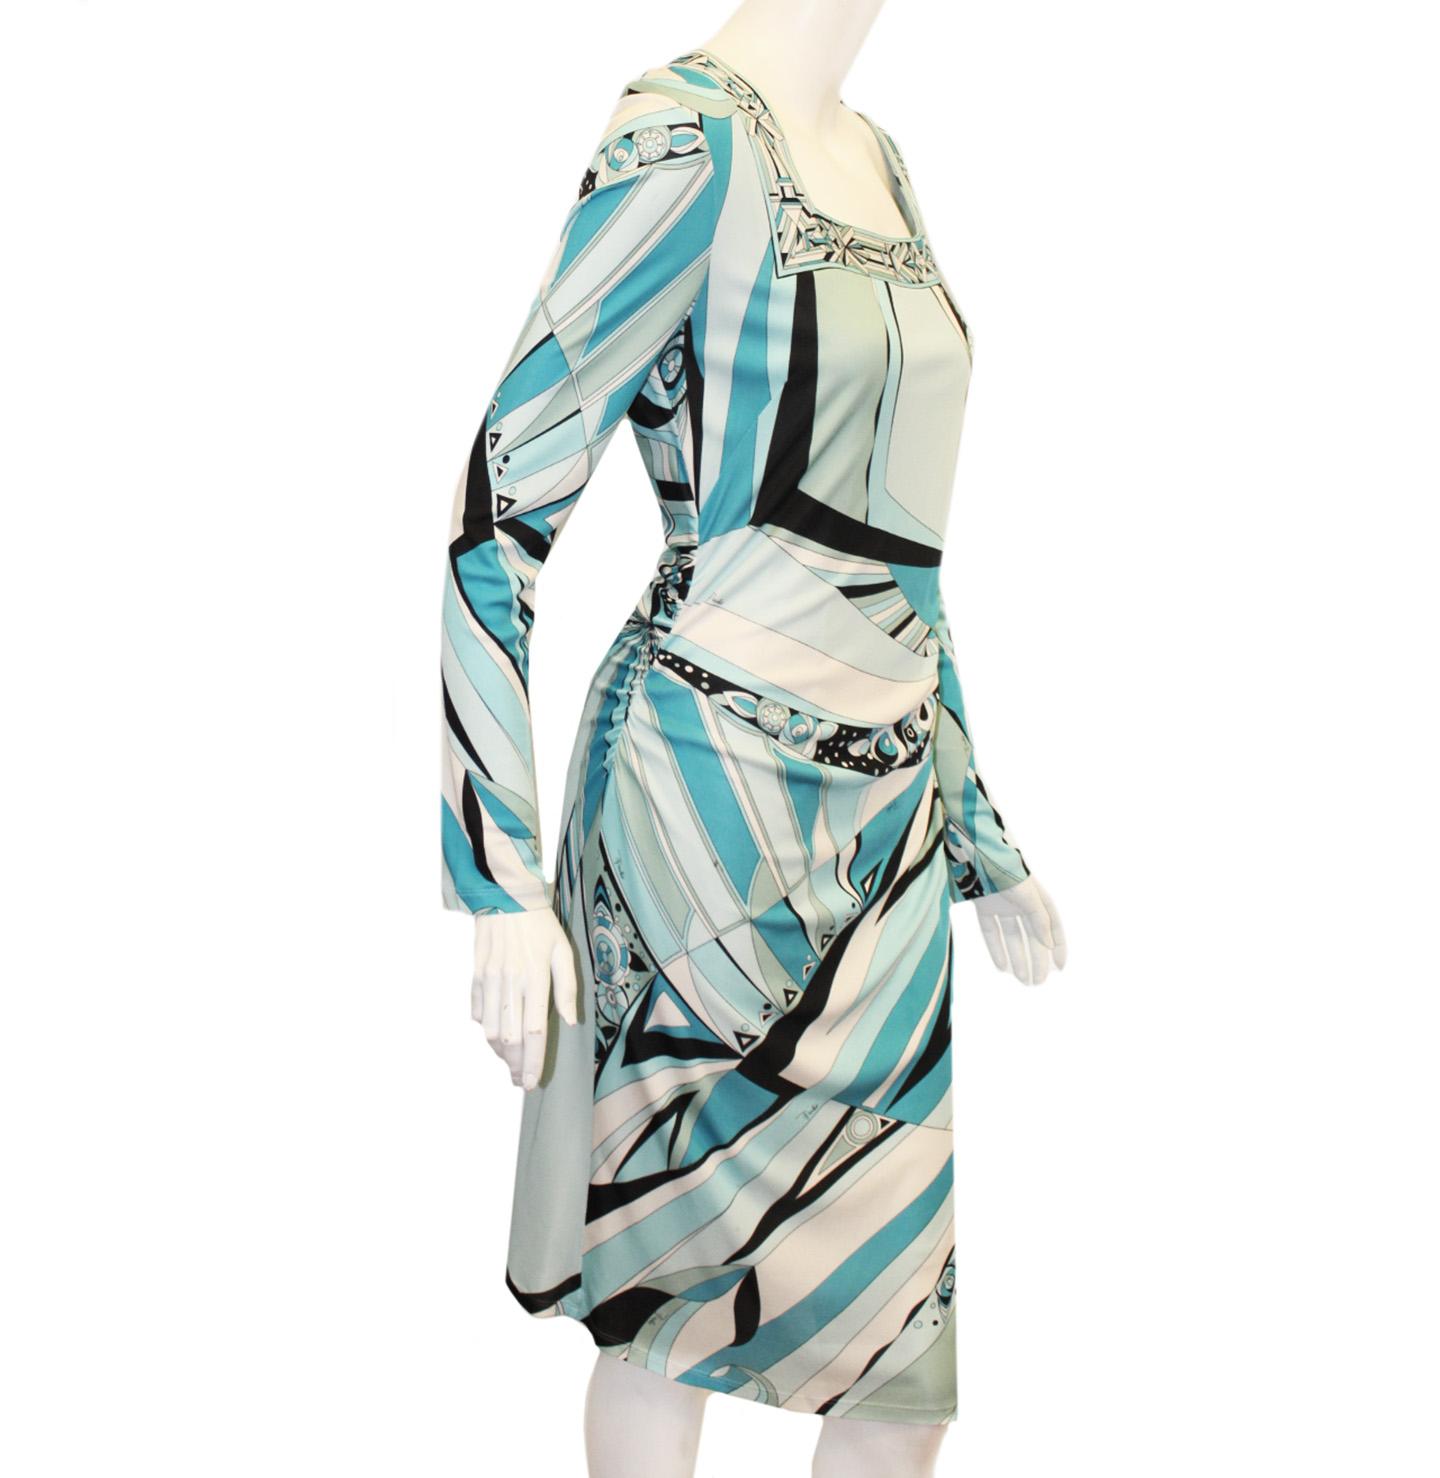 Emilio Pucci blue and turquoise color hues, geometric print dress is gathered at the waist and includes a square neckline.  Dress has long sleeves and is lined in white viscose.  Dress has some minor pulls and stains.  Back zipper for closure.  Made